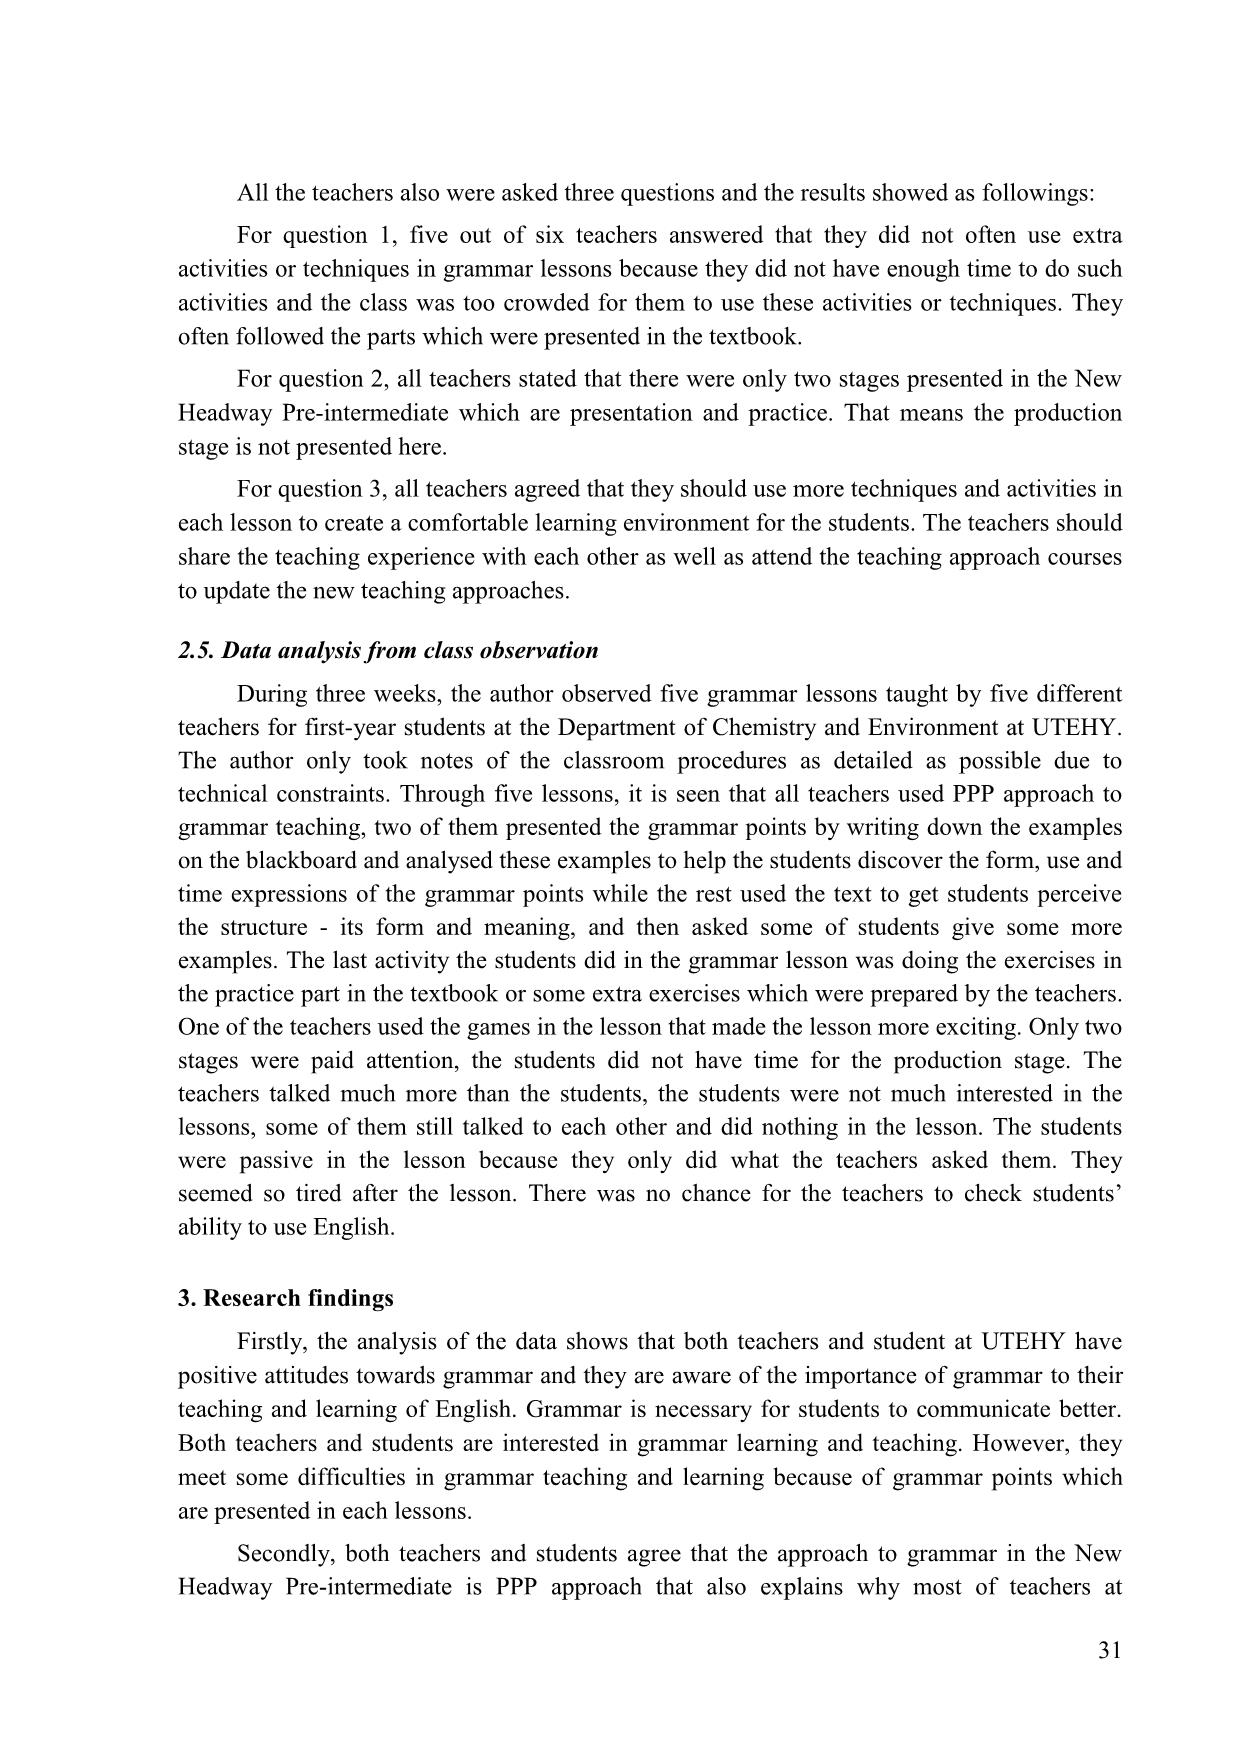 An analysis on grammar approach in the textbook new headway pre-Intermediate and implications for teaching and learning. A cacse study in the department of chemistry and environment of Hung Yen universityof technology and education trang 6